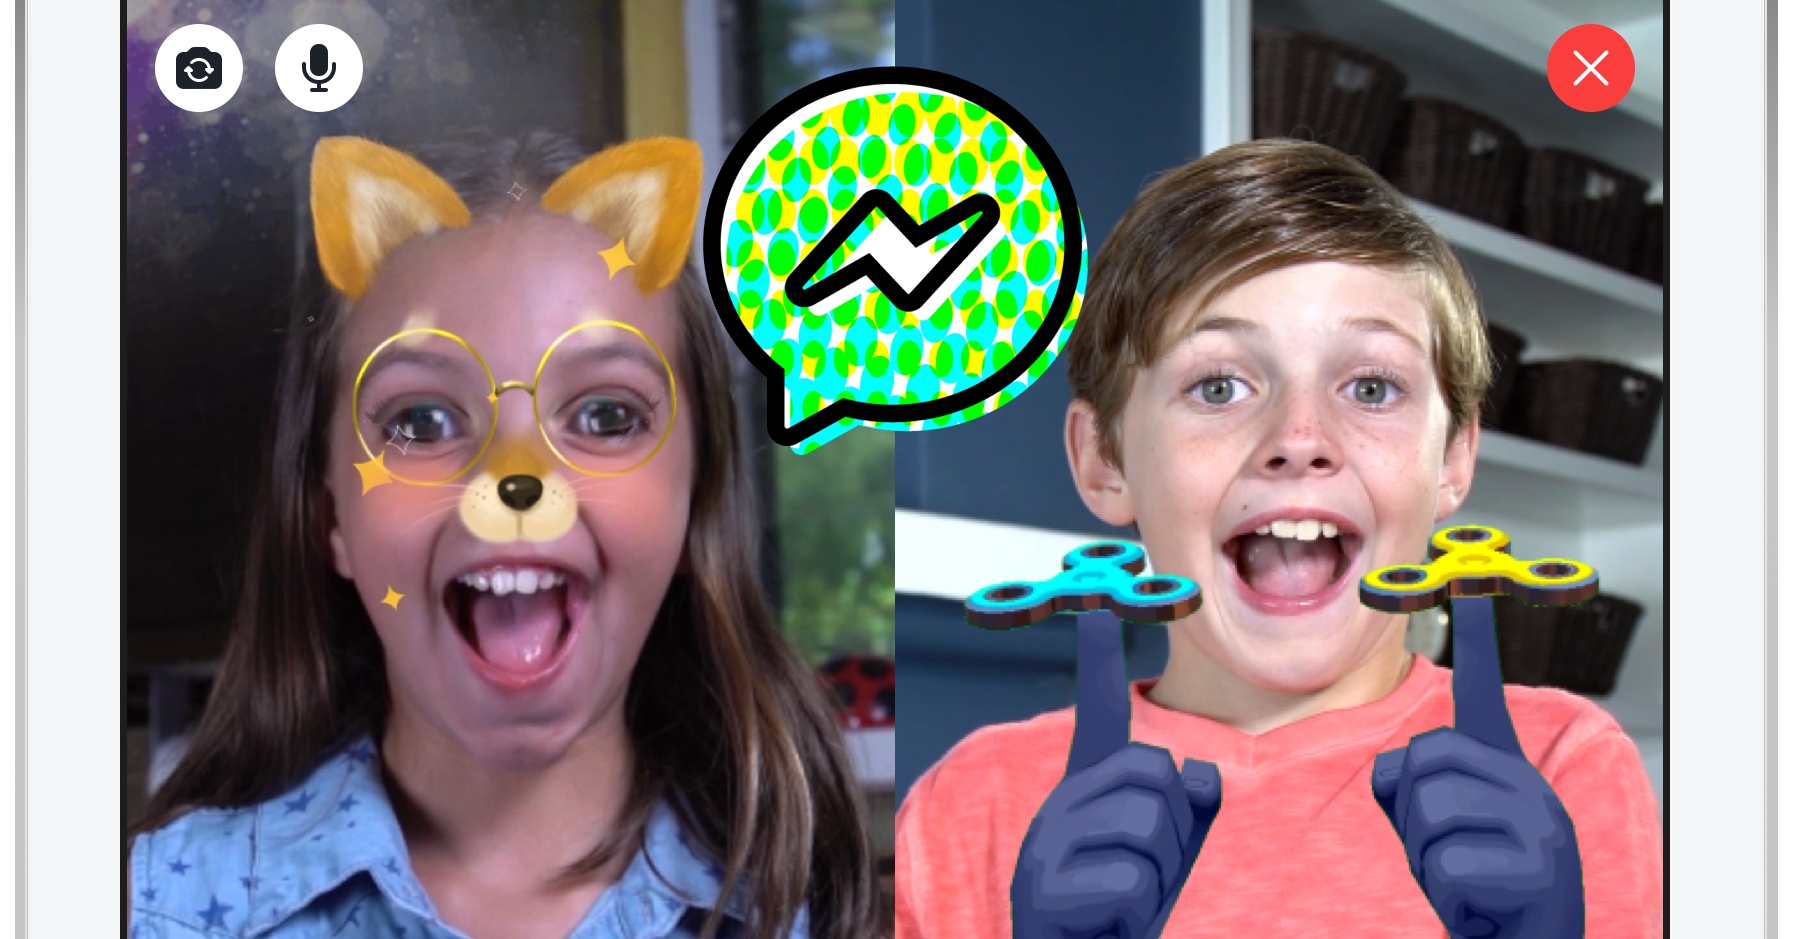 Facebook ‘Messenger Kids’ lets under-13s chat with whom parents approve